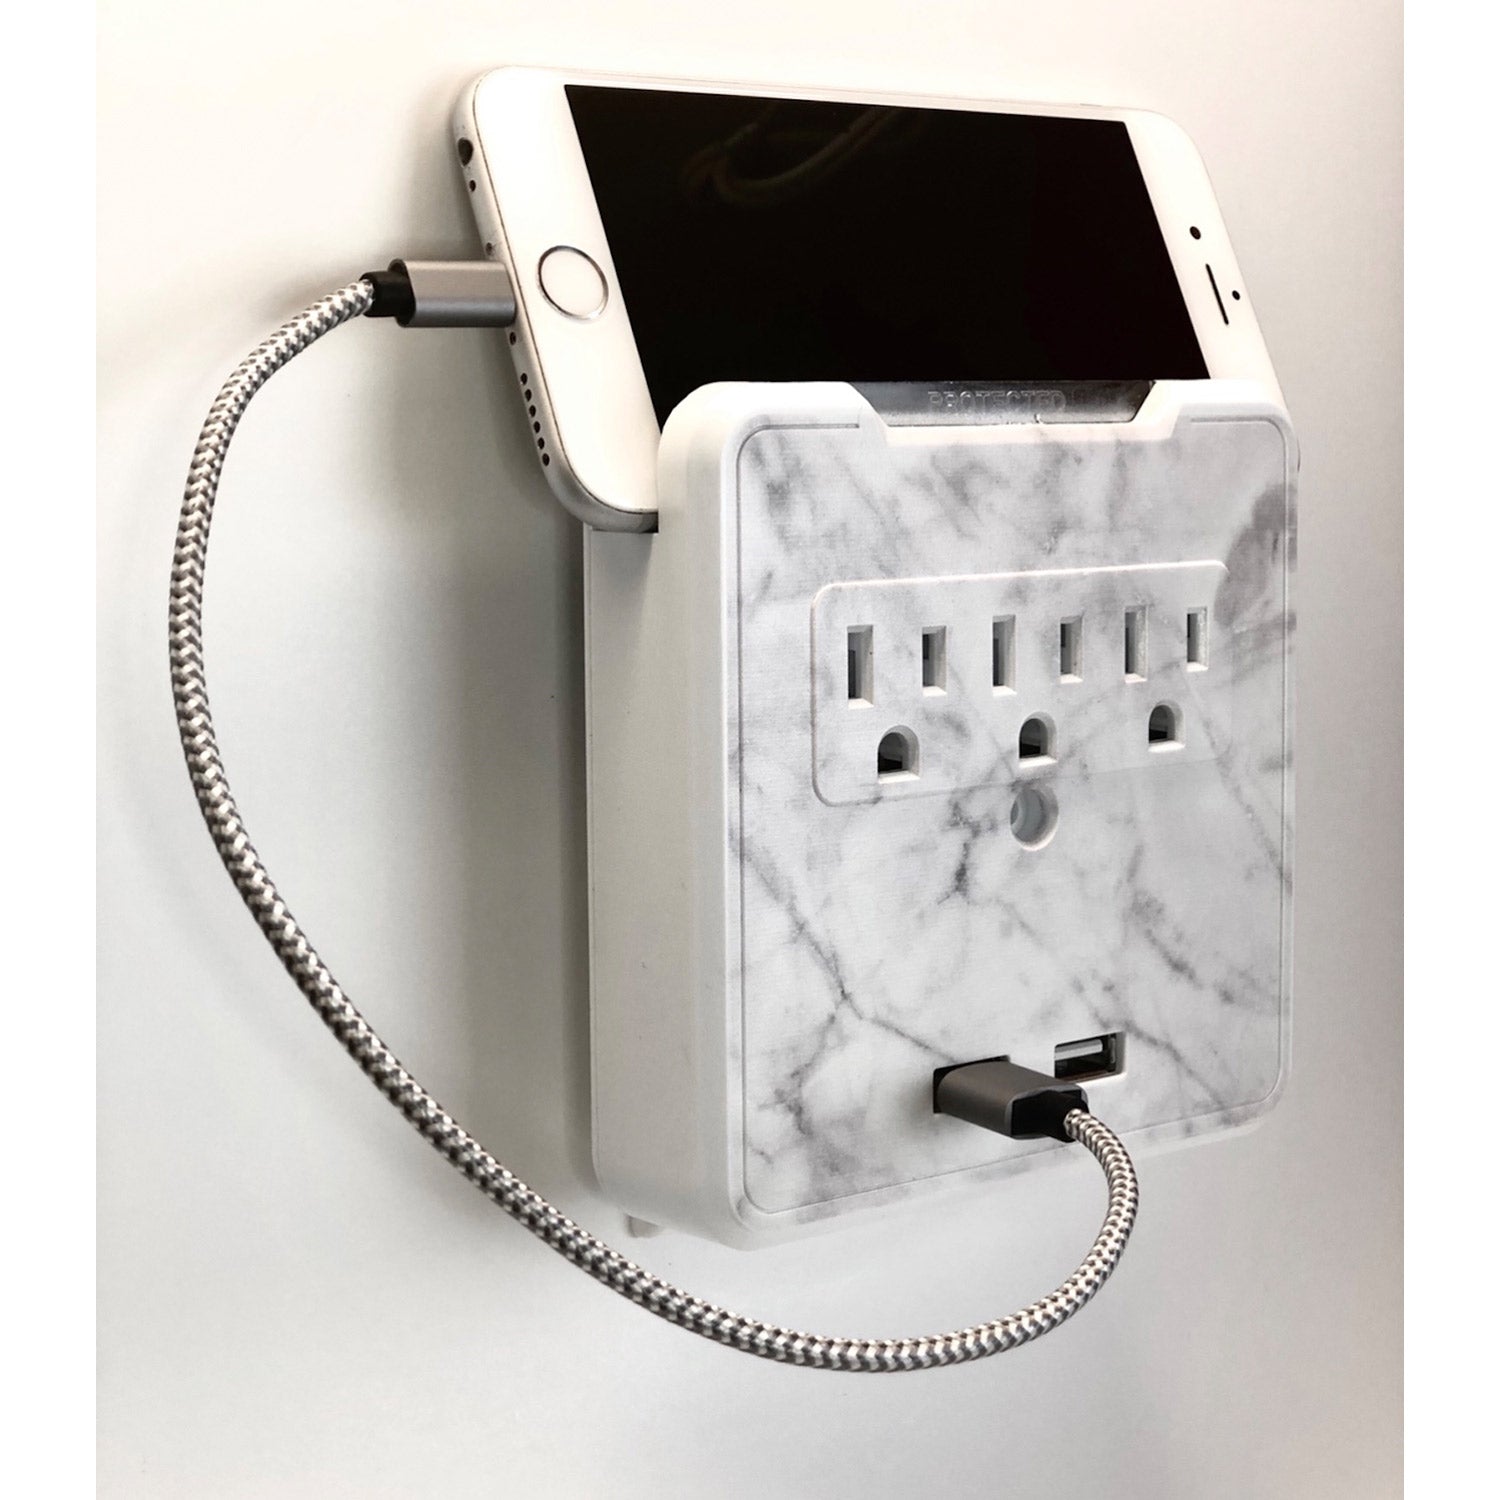 Kelvin Glamsockets - Decorative Wall Mount Surge Protector in Versailles